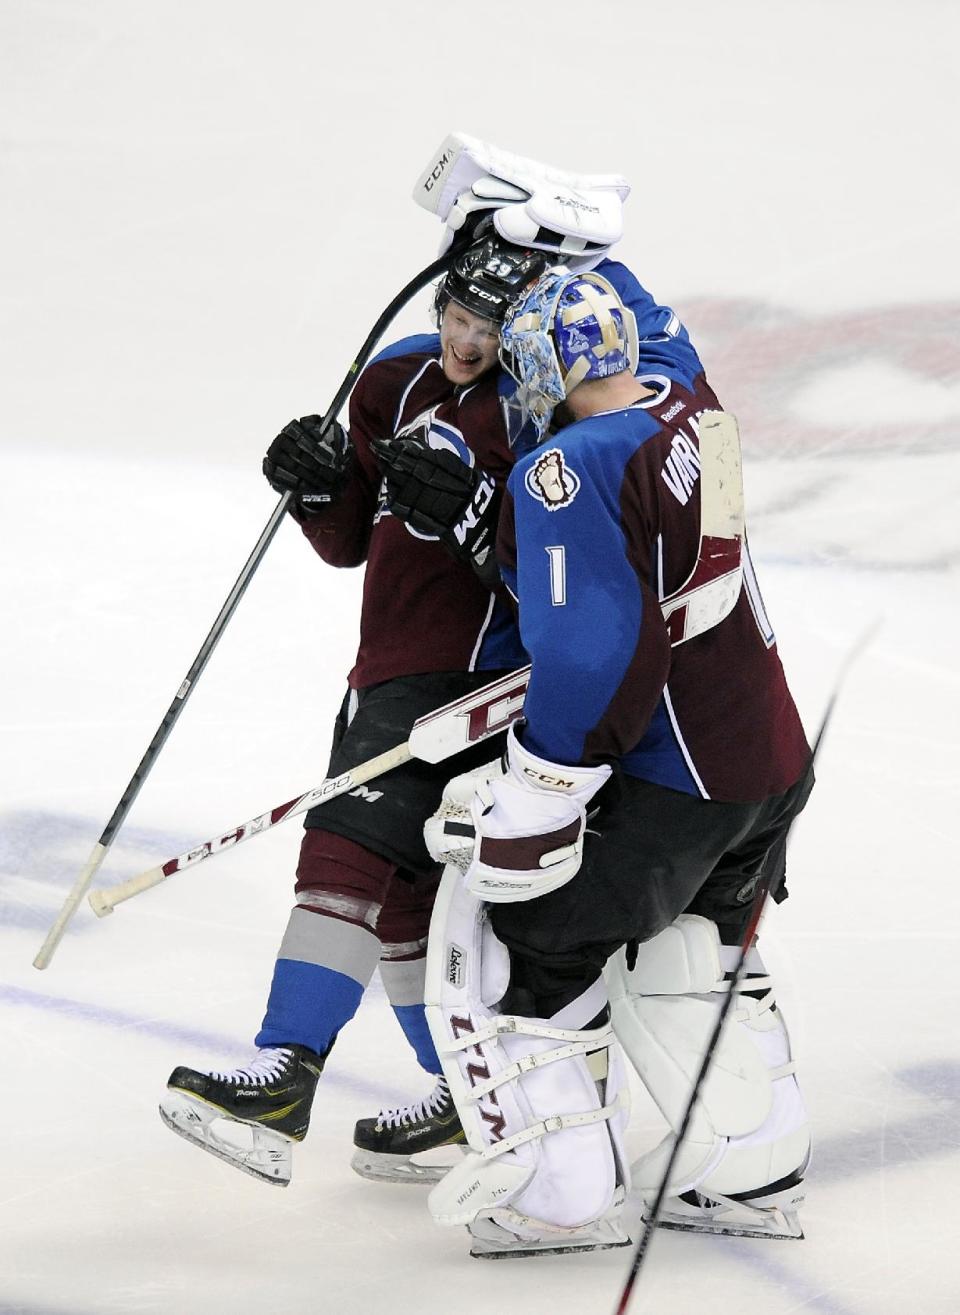 Colorado Avalanche goalie Semyon Varlamov, right, of Russia, congratulates Avalanche center Nathan MacKinnon, left, after MacKinnon scored the game-winning goal in overtime in Game 5 of an NHL hockey first-round playoff series against the Minnesota Wild on Saturday, April 26, 2014, in Denver. The Avalanche won 4-3. (AP Photo/Chris Schneider)